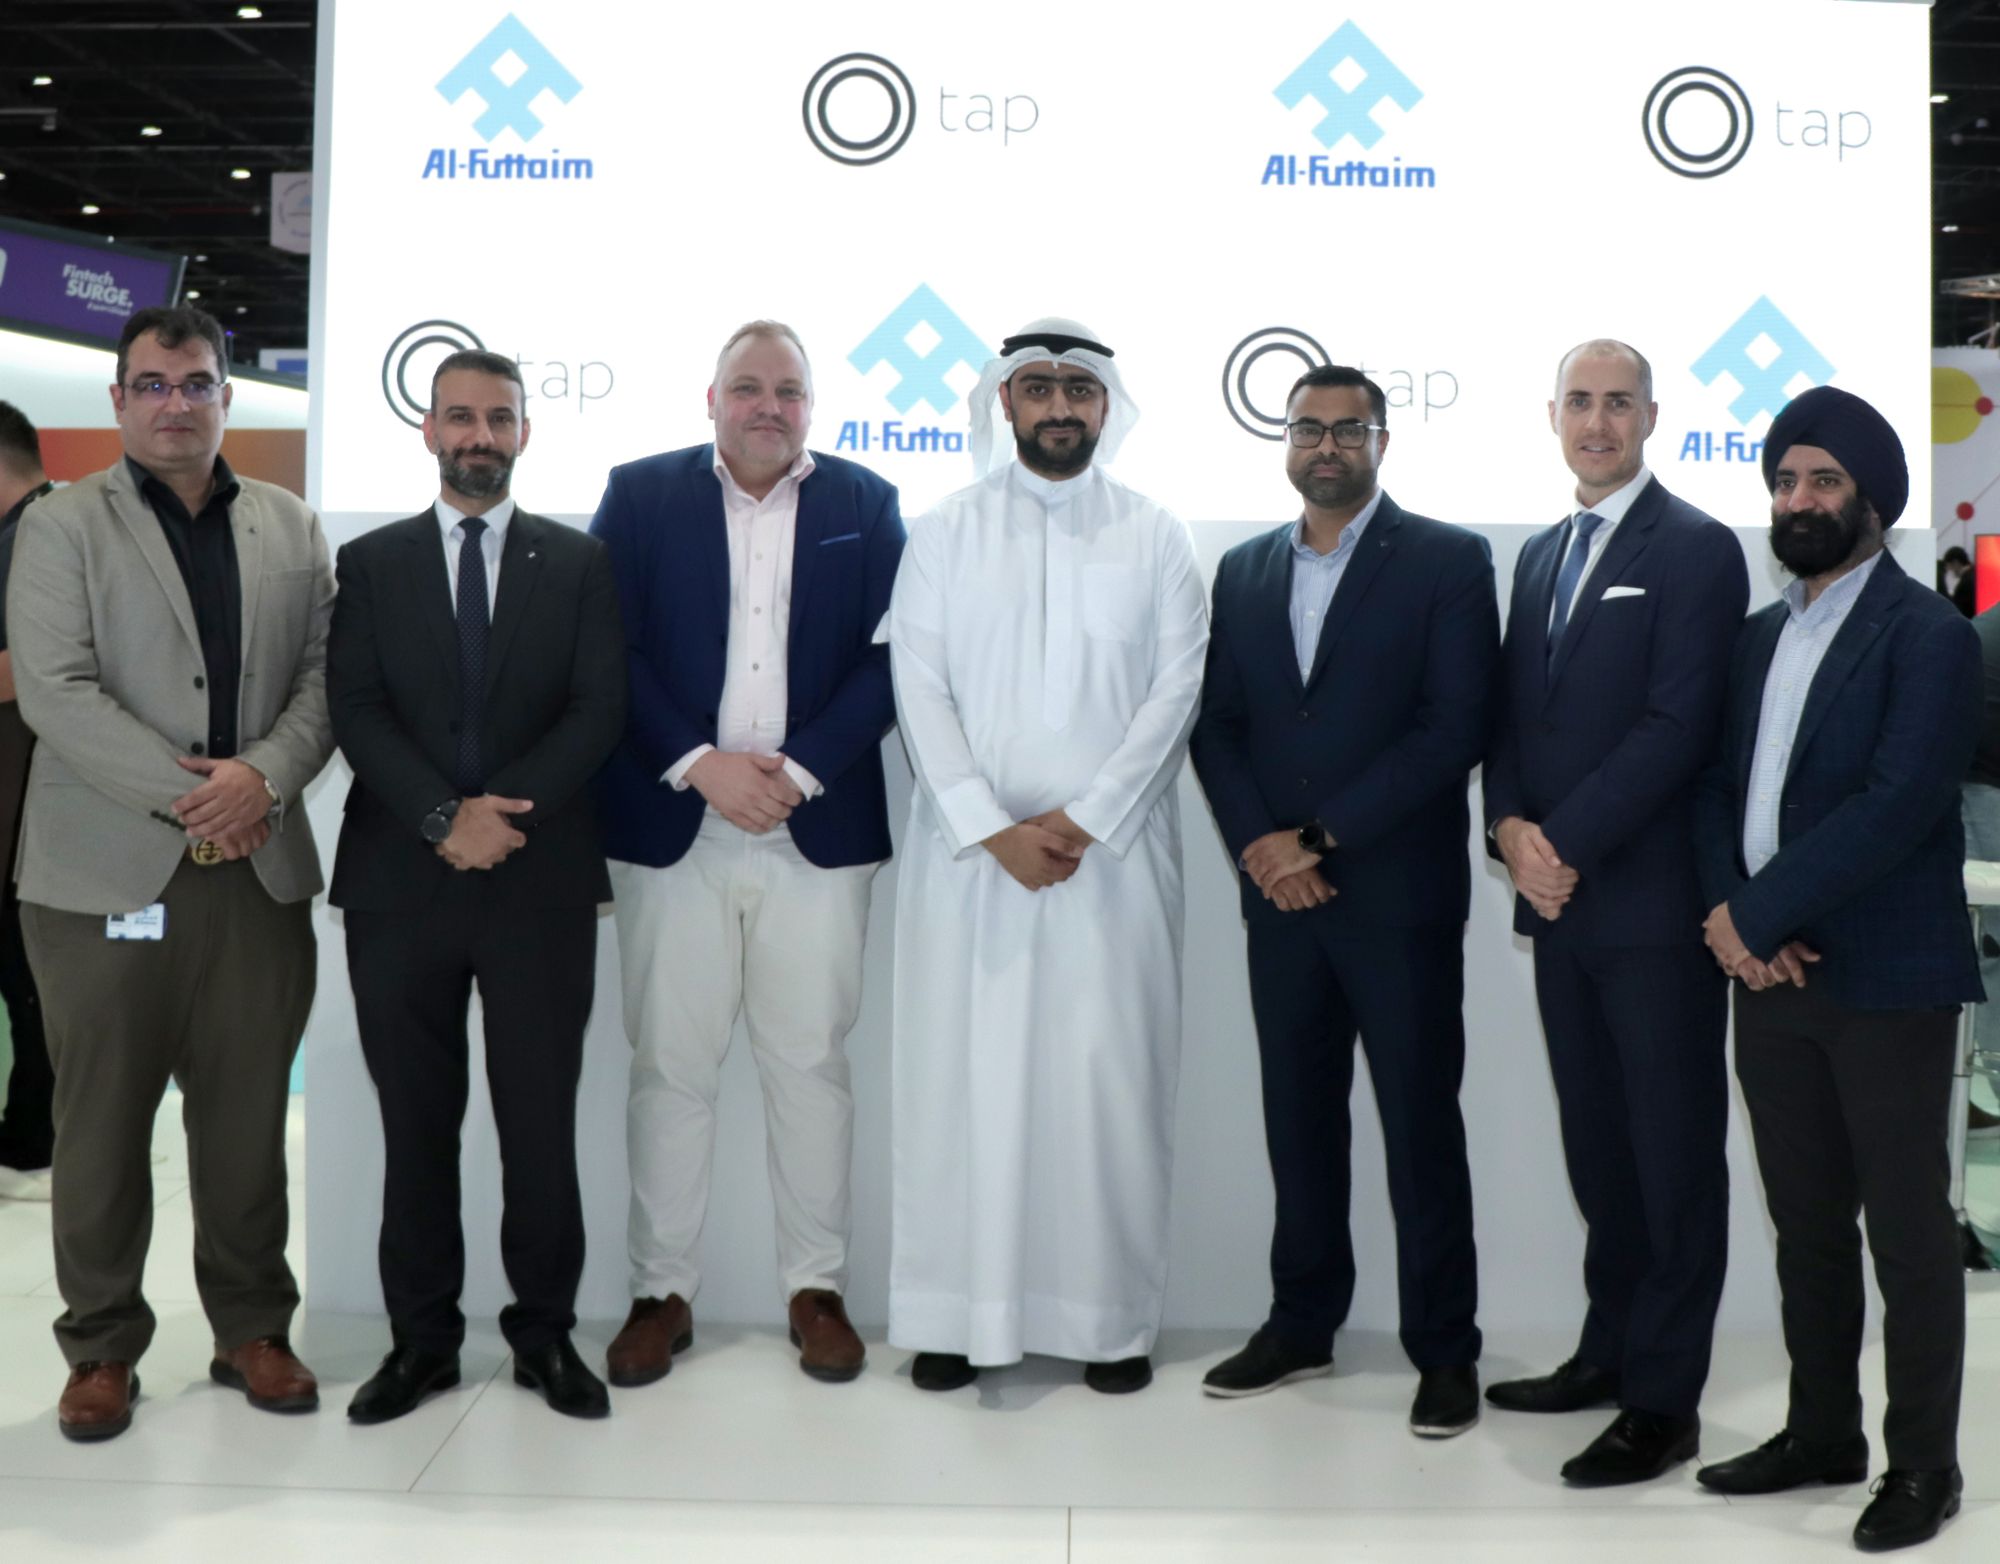 Al-Futtaim Group and Tap Payments sign GCC payments deal